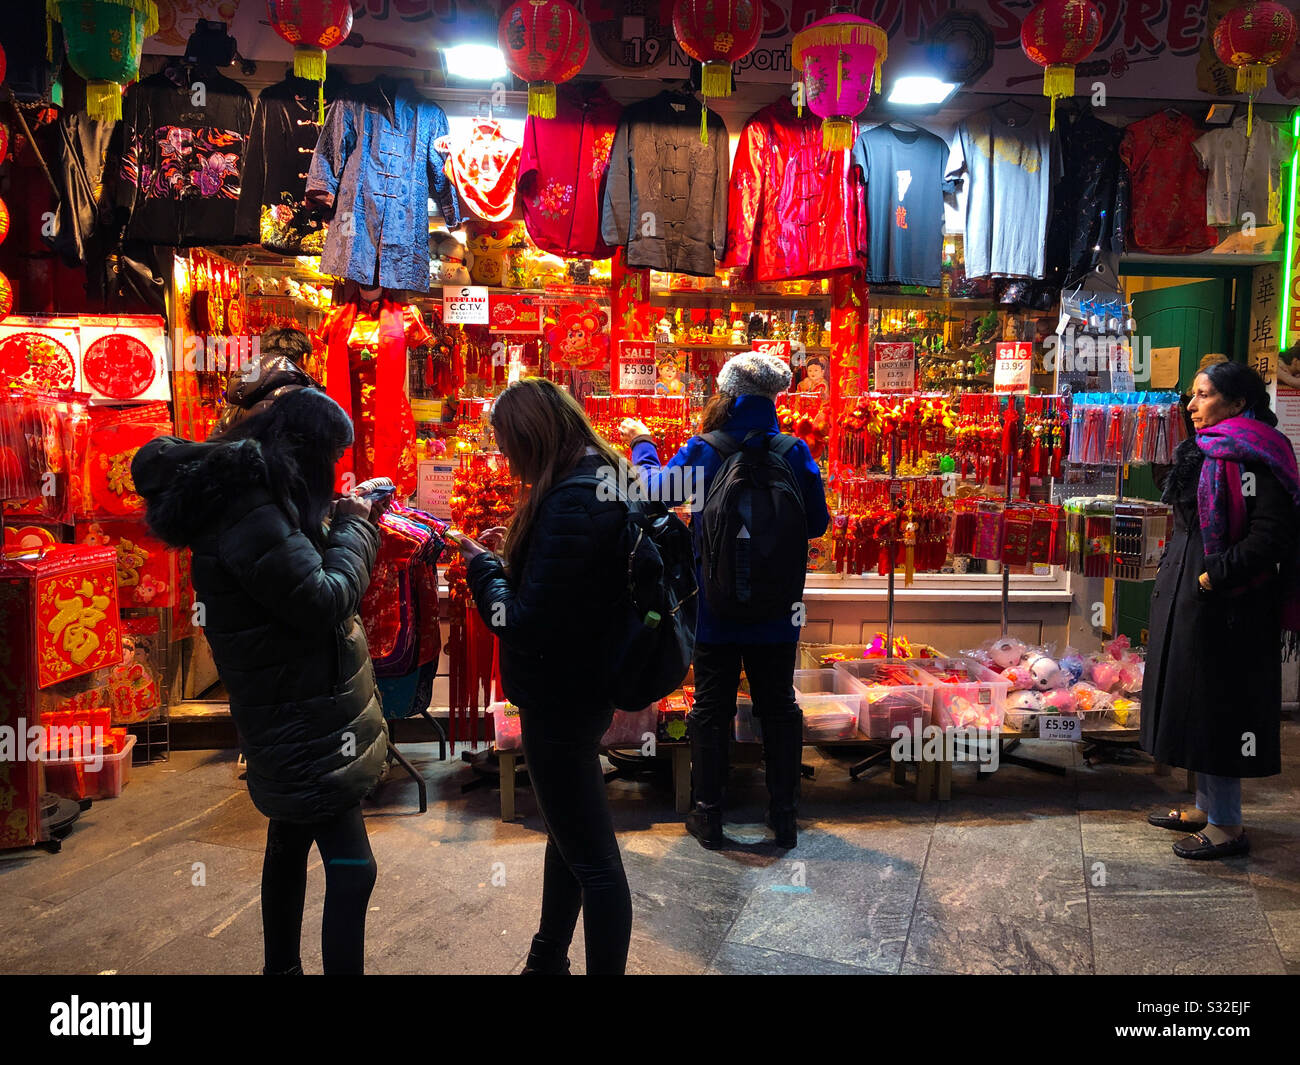 People including Chinese girls on mobile phones, outside a shop selling clothes and accessories decorated for Chinese New Year, Chinatown, London, England Stock Photo